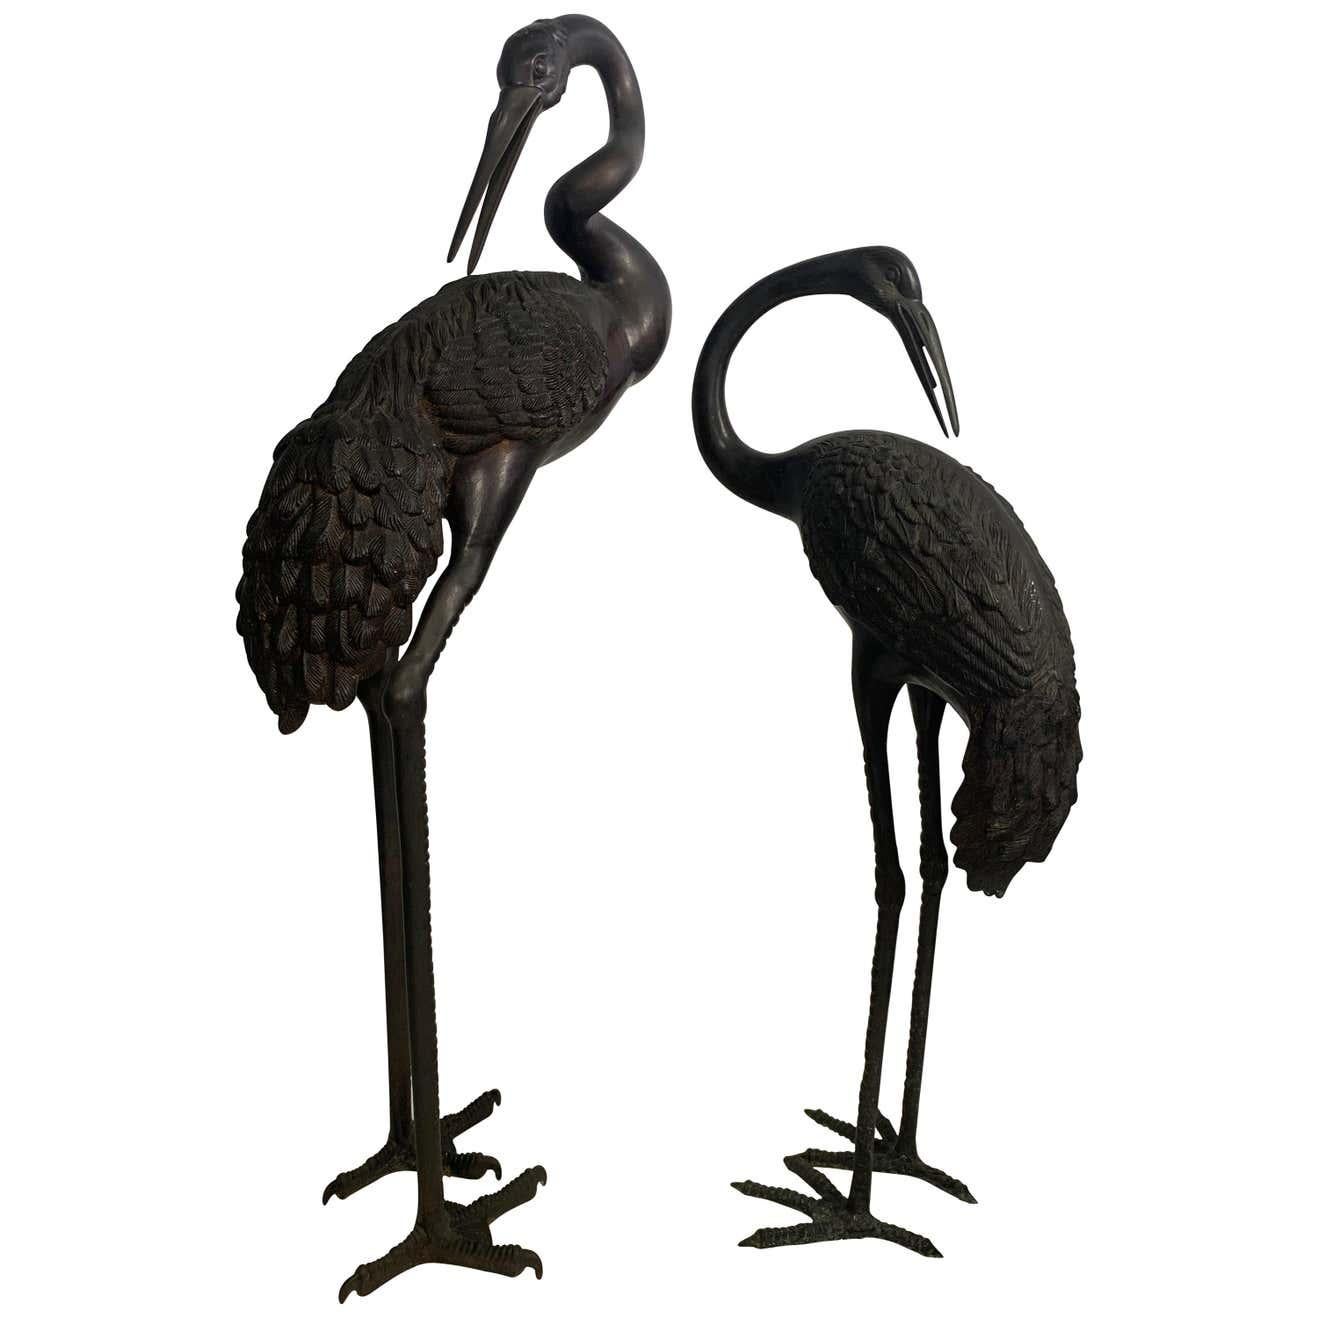 A pair of large bronze oriental cranes. A symbol of longevity and wisdom in oriental mythology, the crane is also considered to be the intermediary between earth and heaven. Measures: Male crane- height 55 (inches), width 21 (inches), depth 9